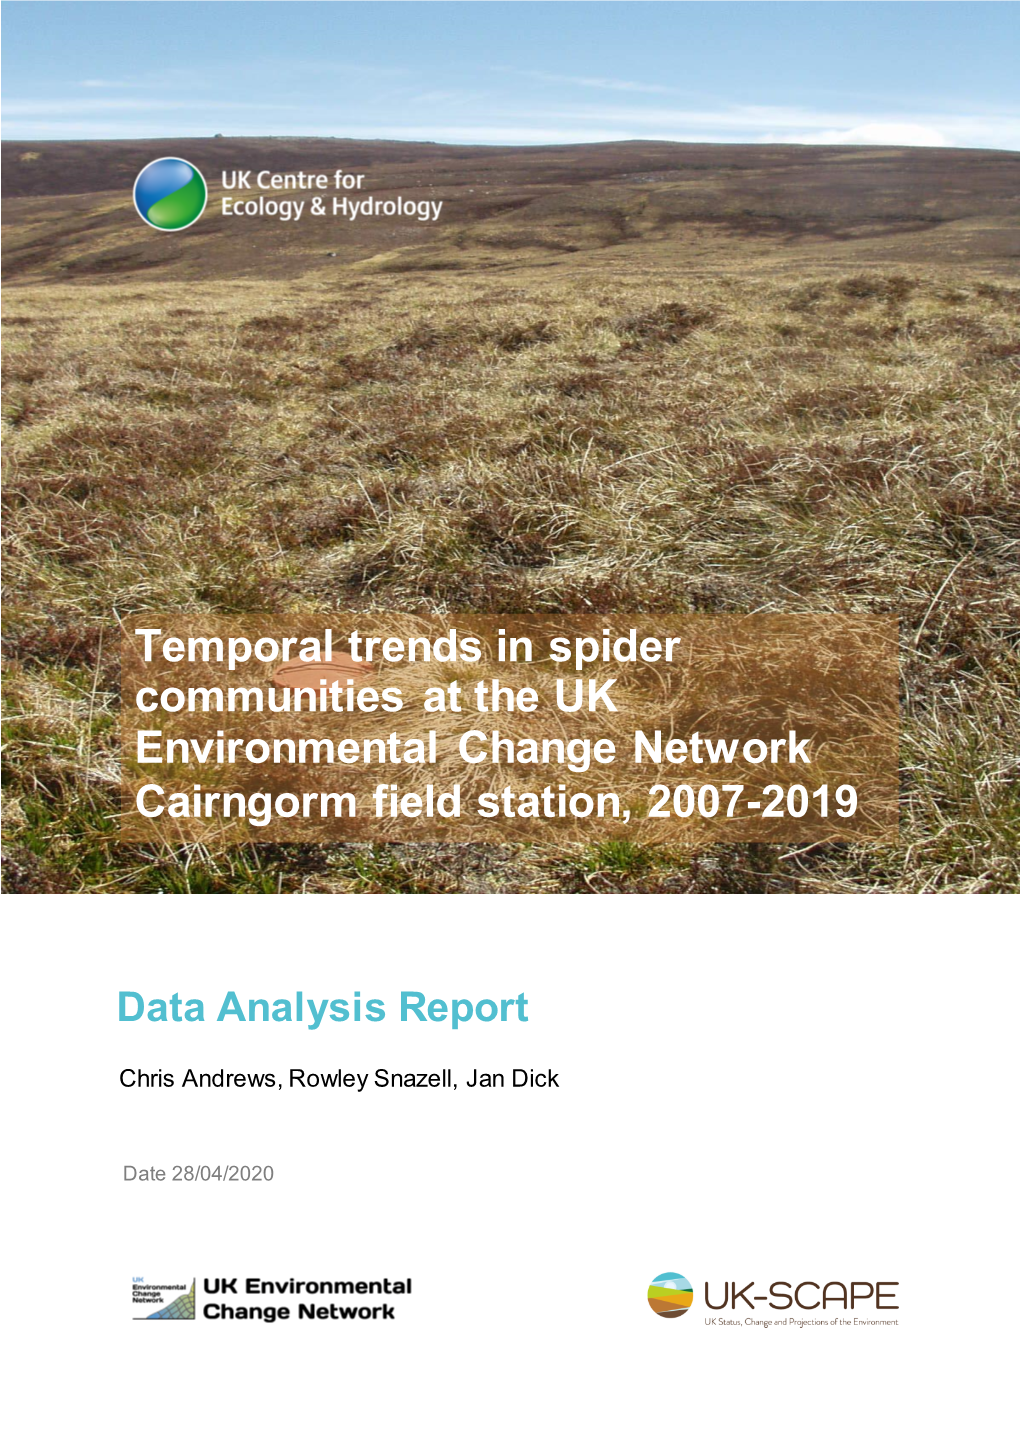 Spider Community and Species Trends at the UK Environmental Change Network Cairngorm Field Station, 2007-2019